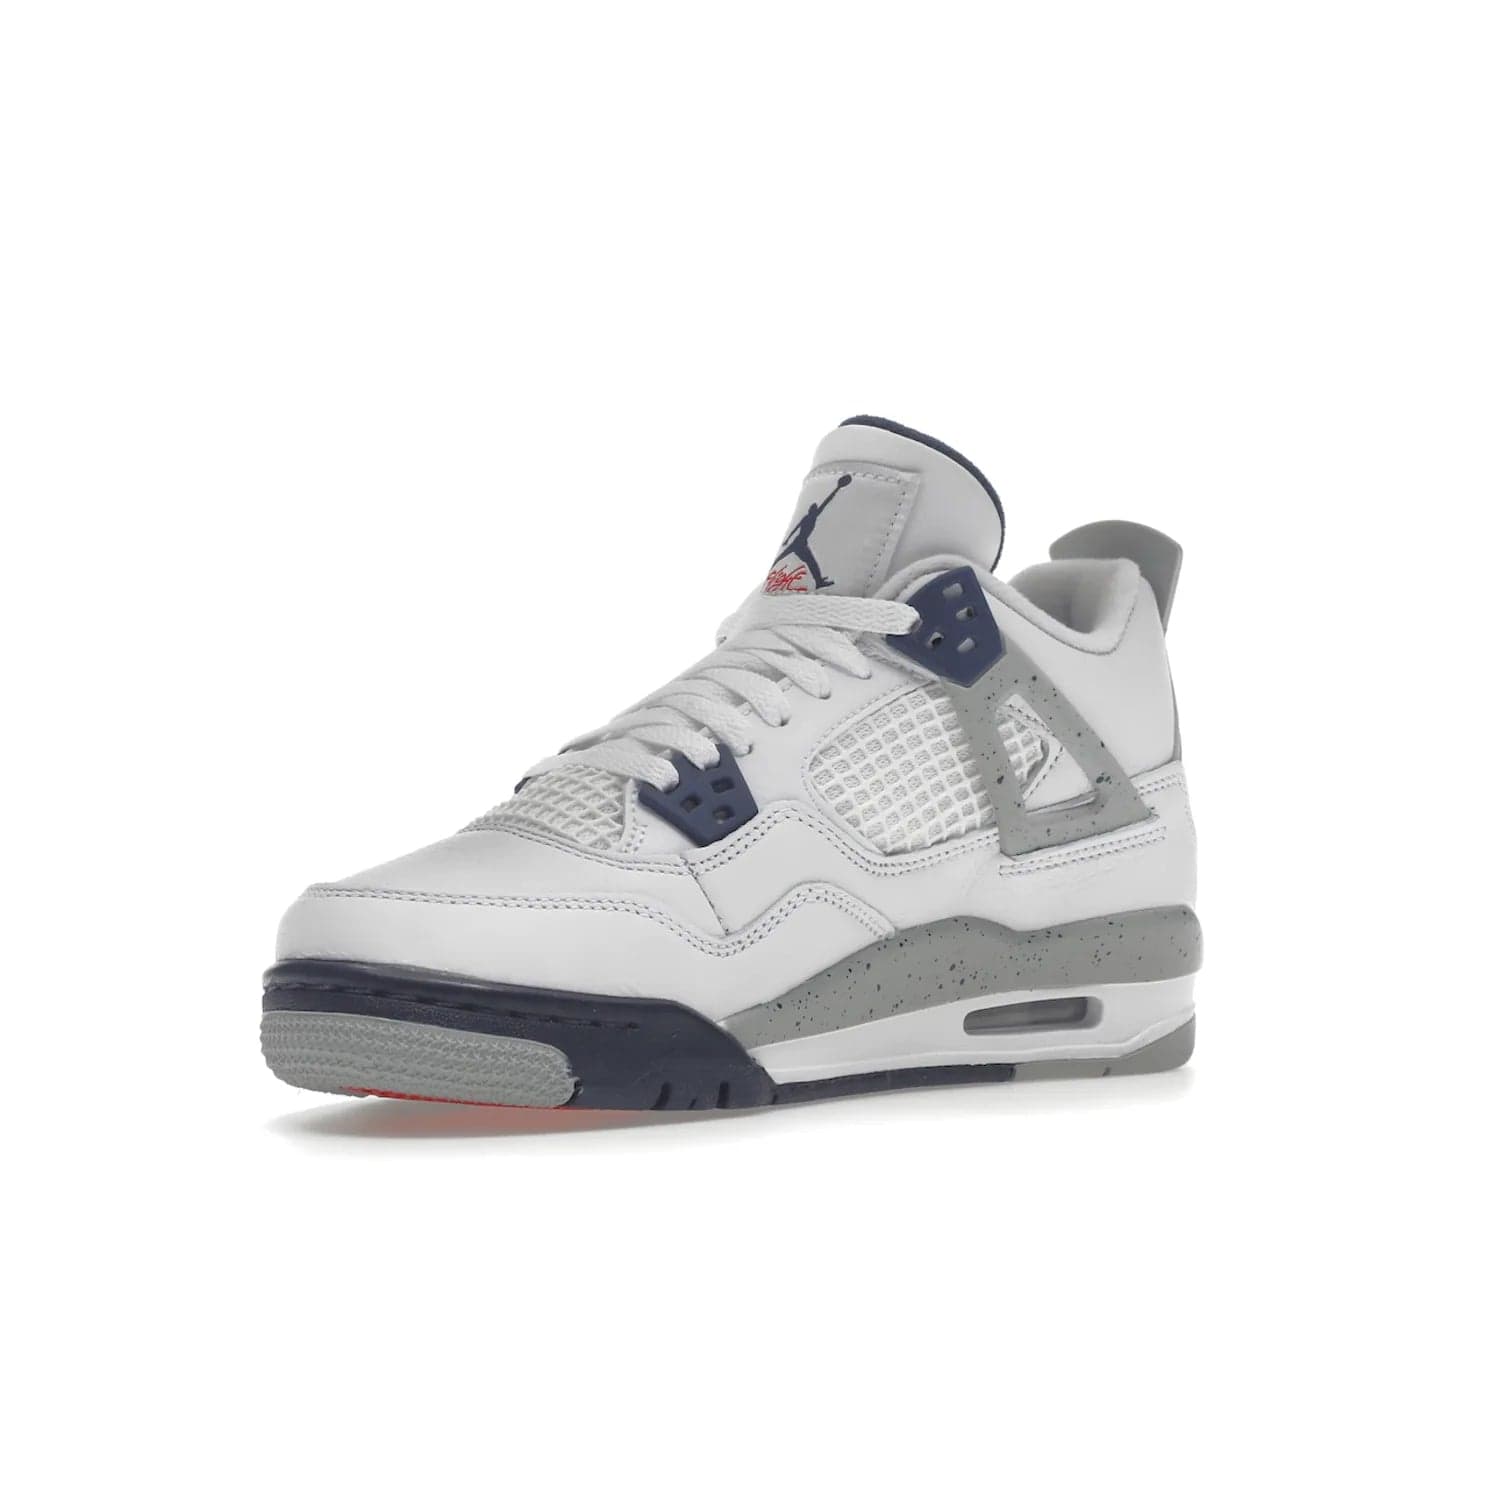 Jordan 4 Retro Midnight Navy (GS) - Image 15 - Only at www.BallersClubKickz.com - Shop the Air Jordan 4 Retro Midnight Navy GS. The white leather upper features black support wings & heel tab, navy eyelets & woven tongue tag with Jumpman logos. The midsole features two-tone polyurethane insole & AIR units in the heel & forefoot. Get the white/midnight navy/light smoke grey/fire colorway & show off your style.